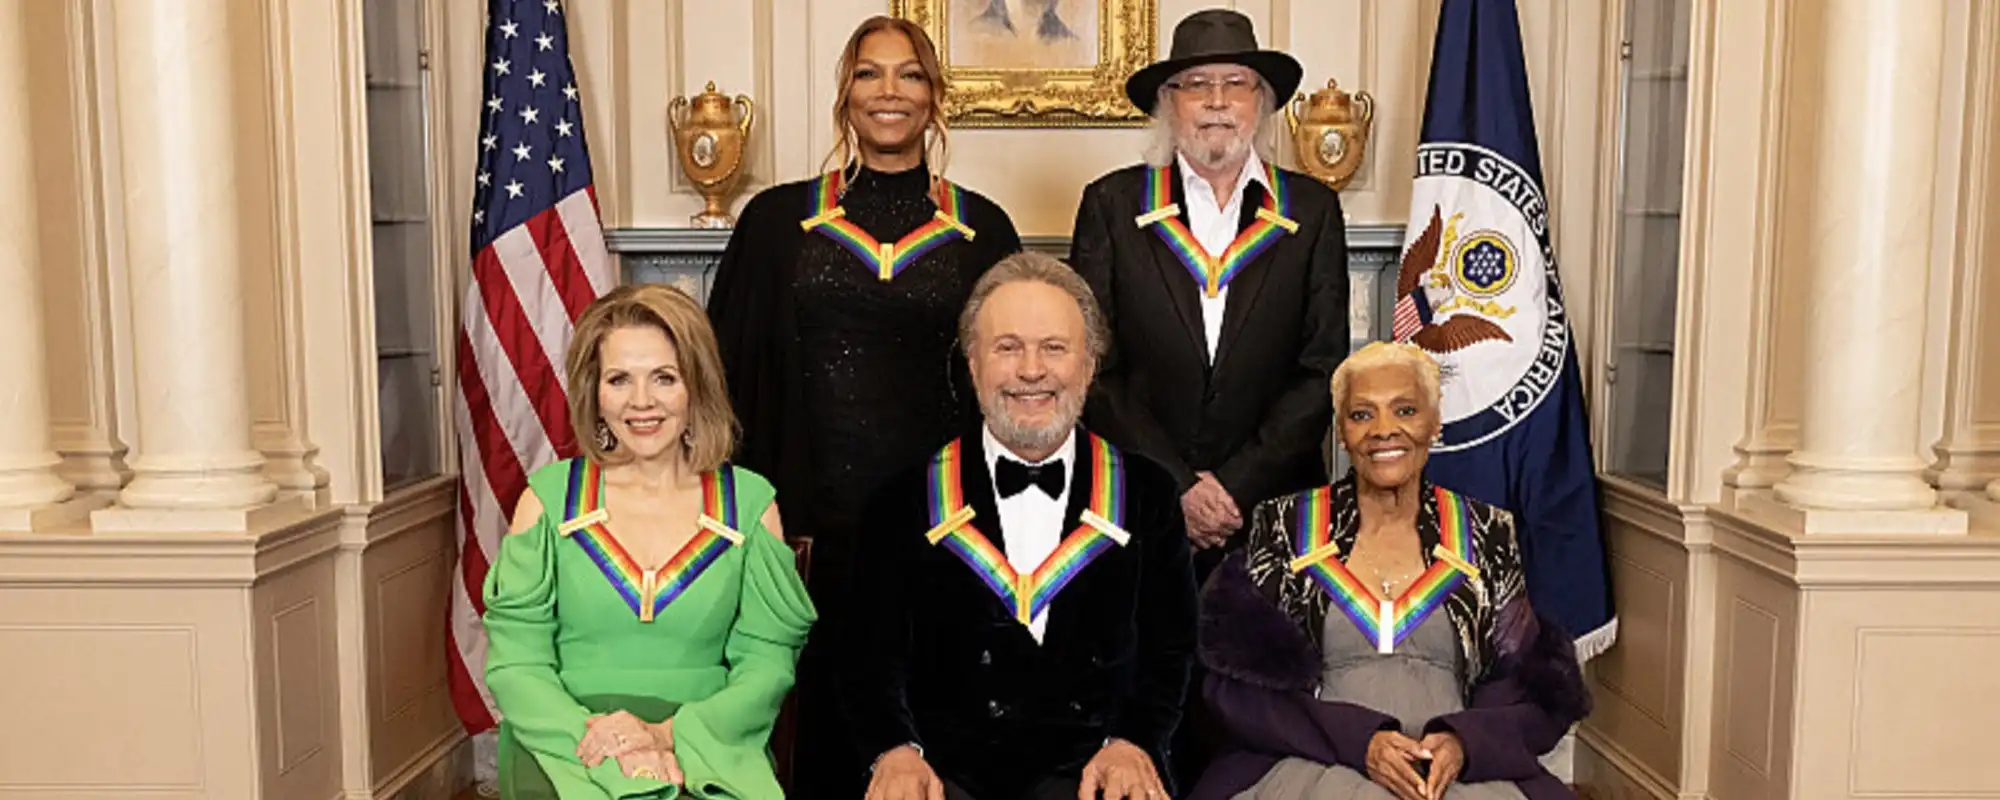 Watch 46th Kennedy Center Honors Featuring Tributes Barry Gibb, Dionne Warwick, Queen Latifah